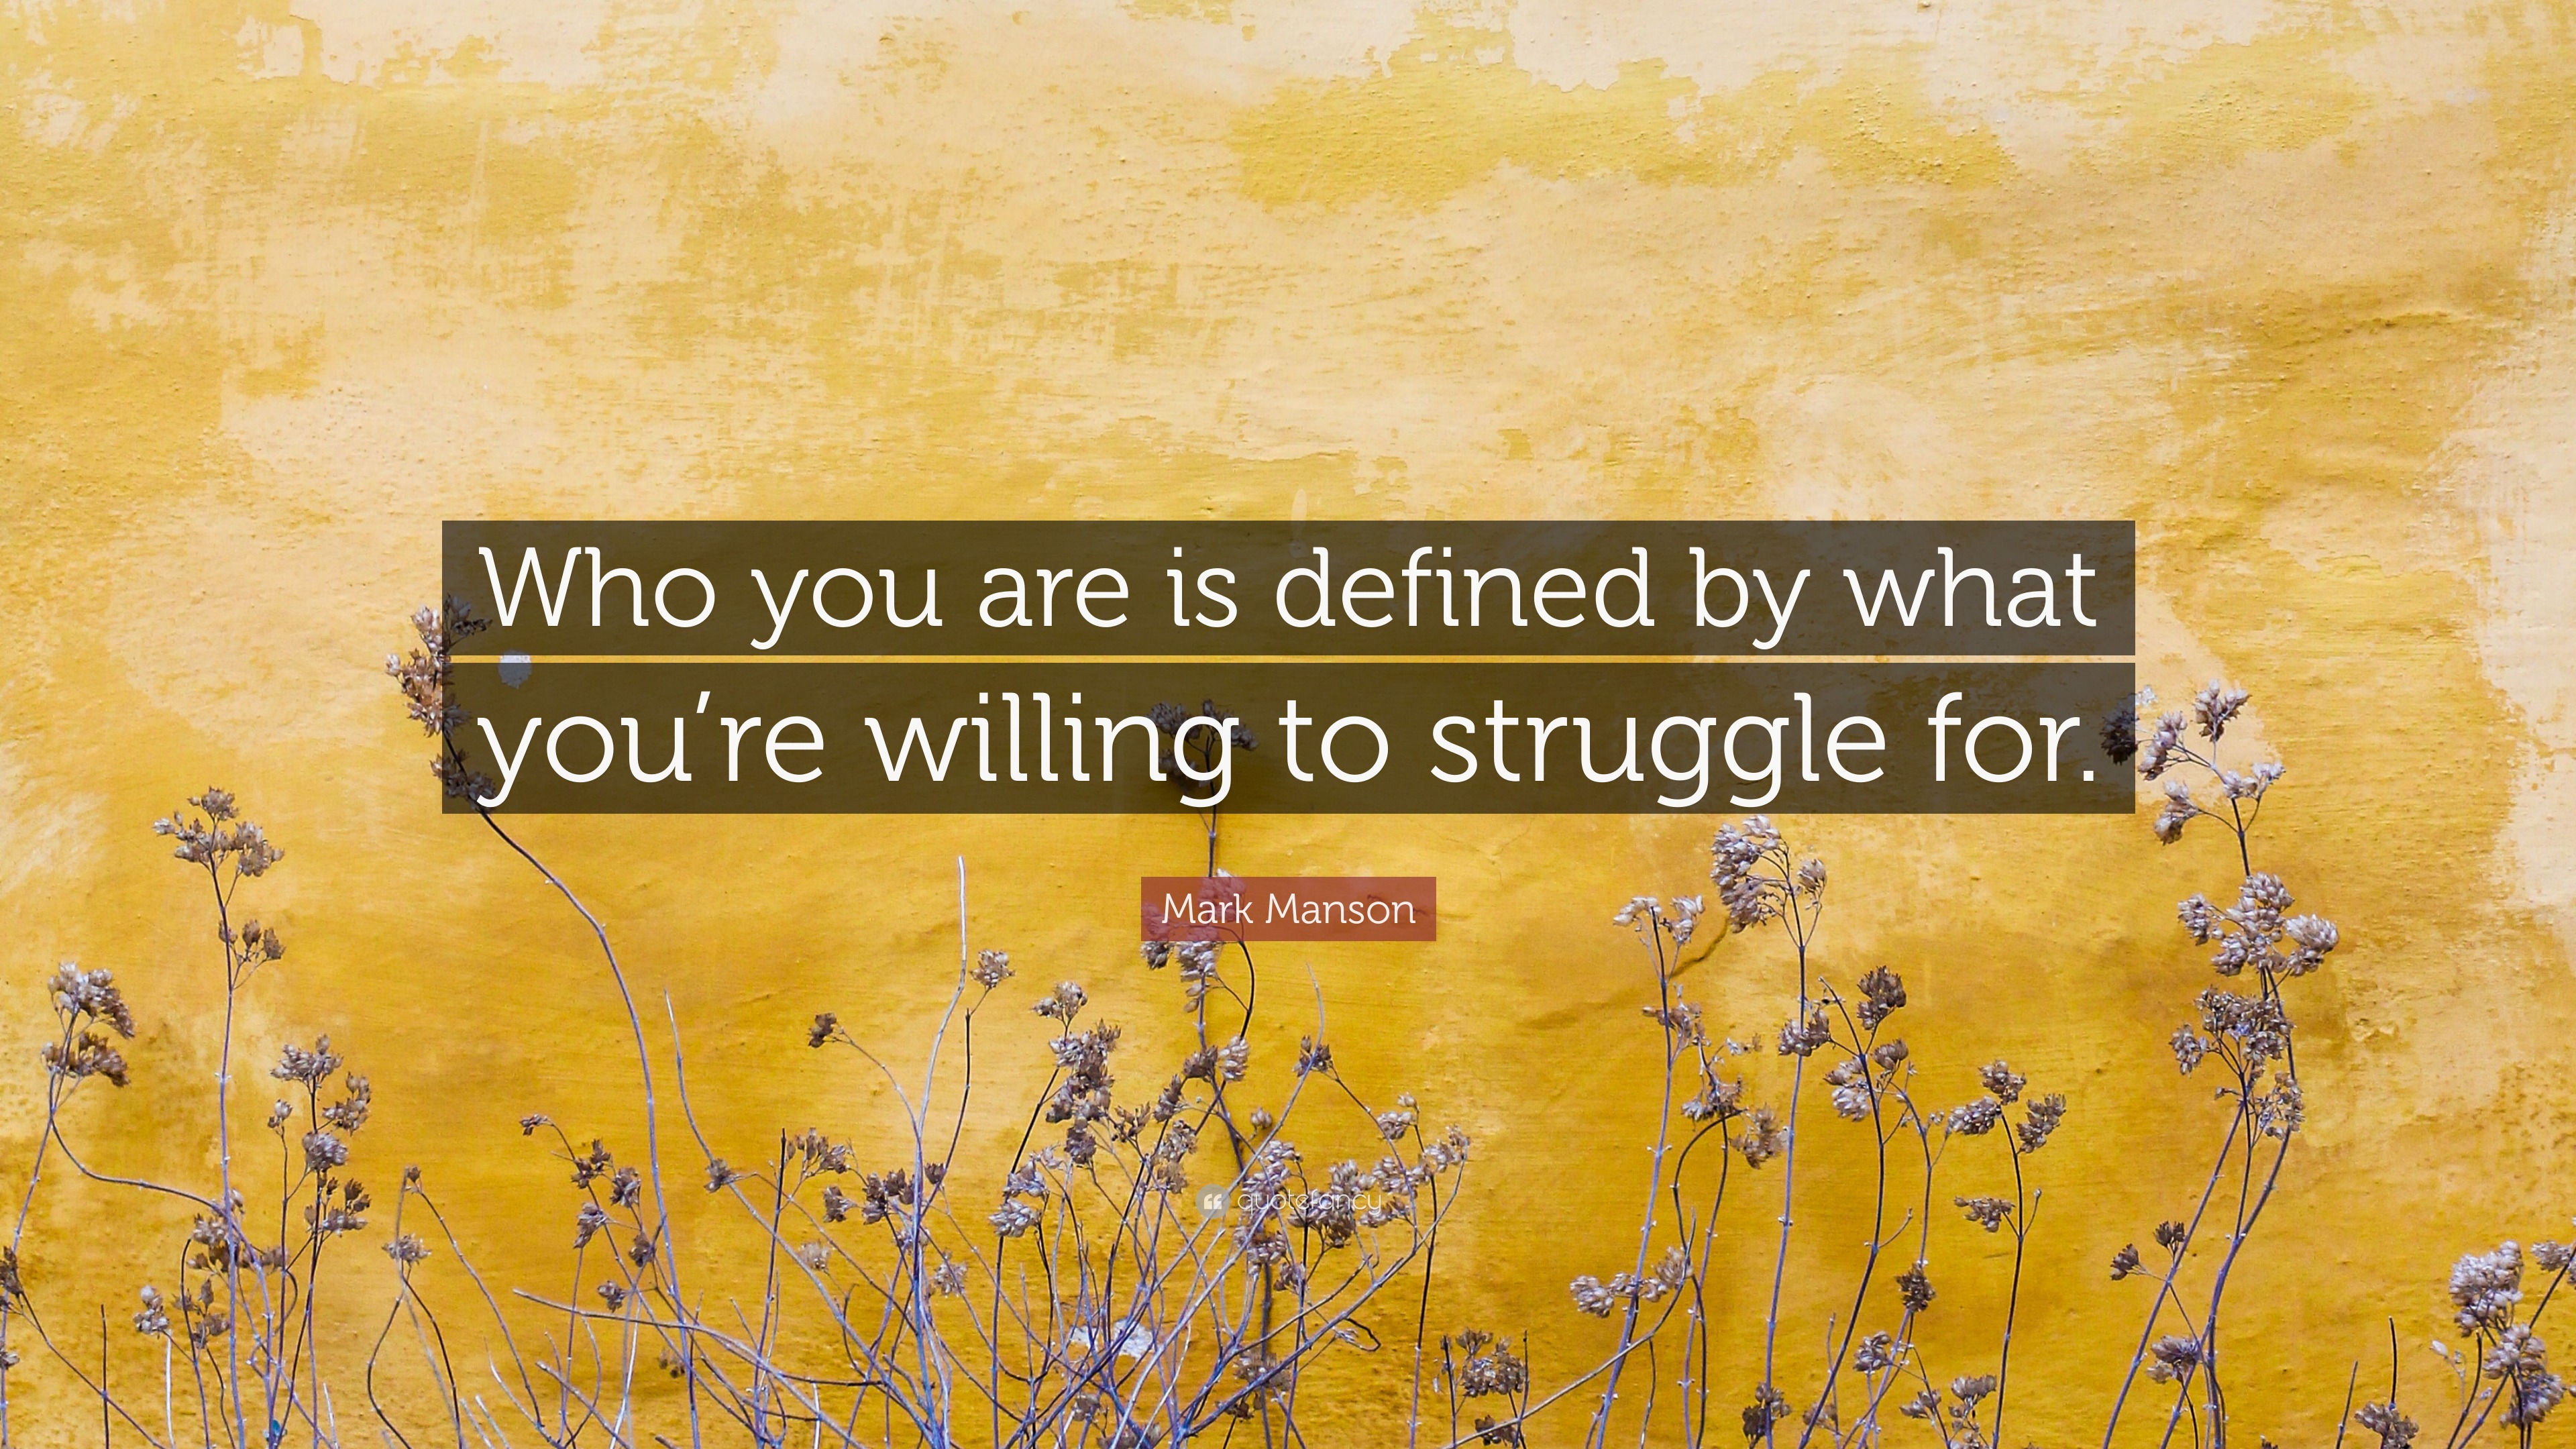 Mark Manson Quote: “Who you are is defined by what you’re willing to